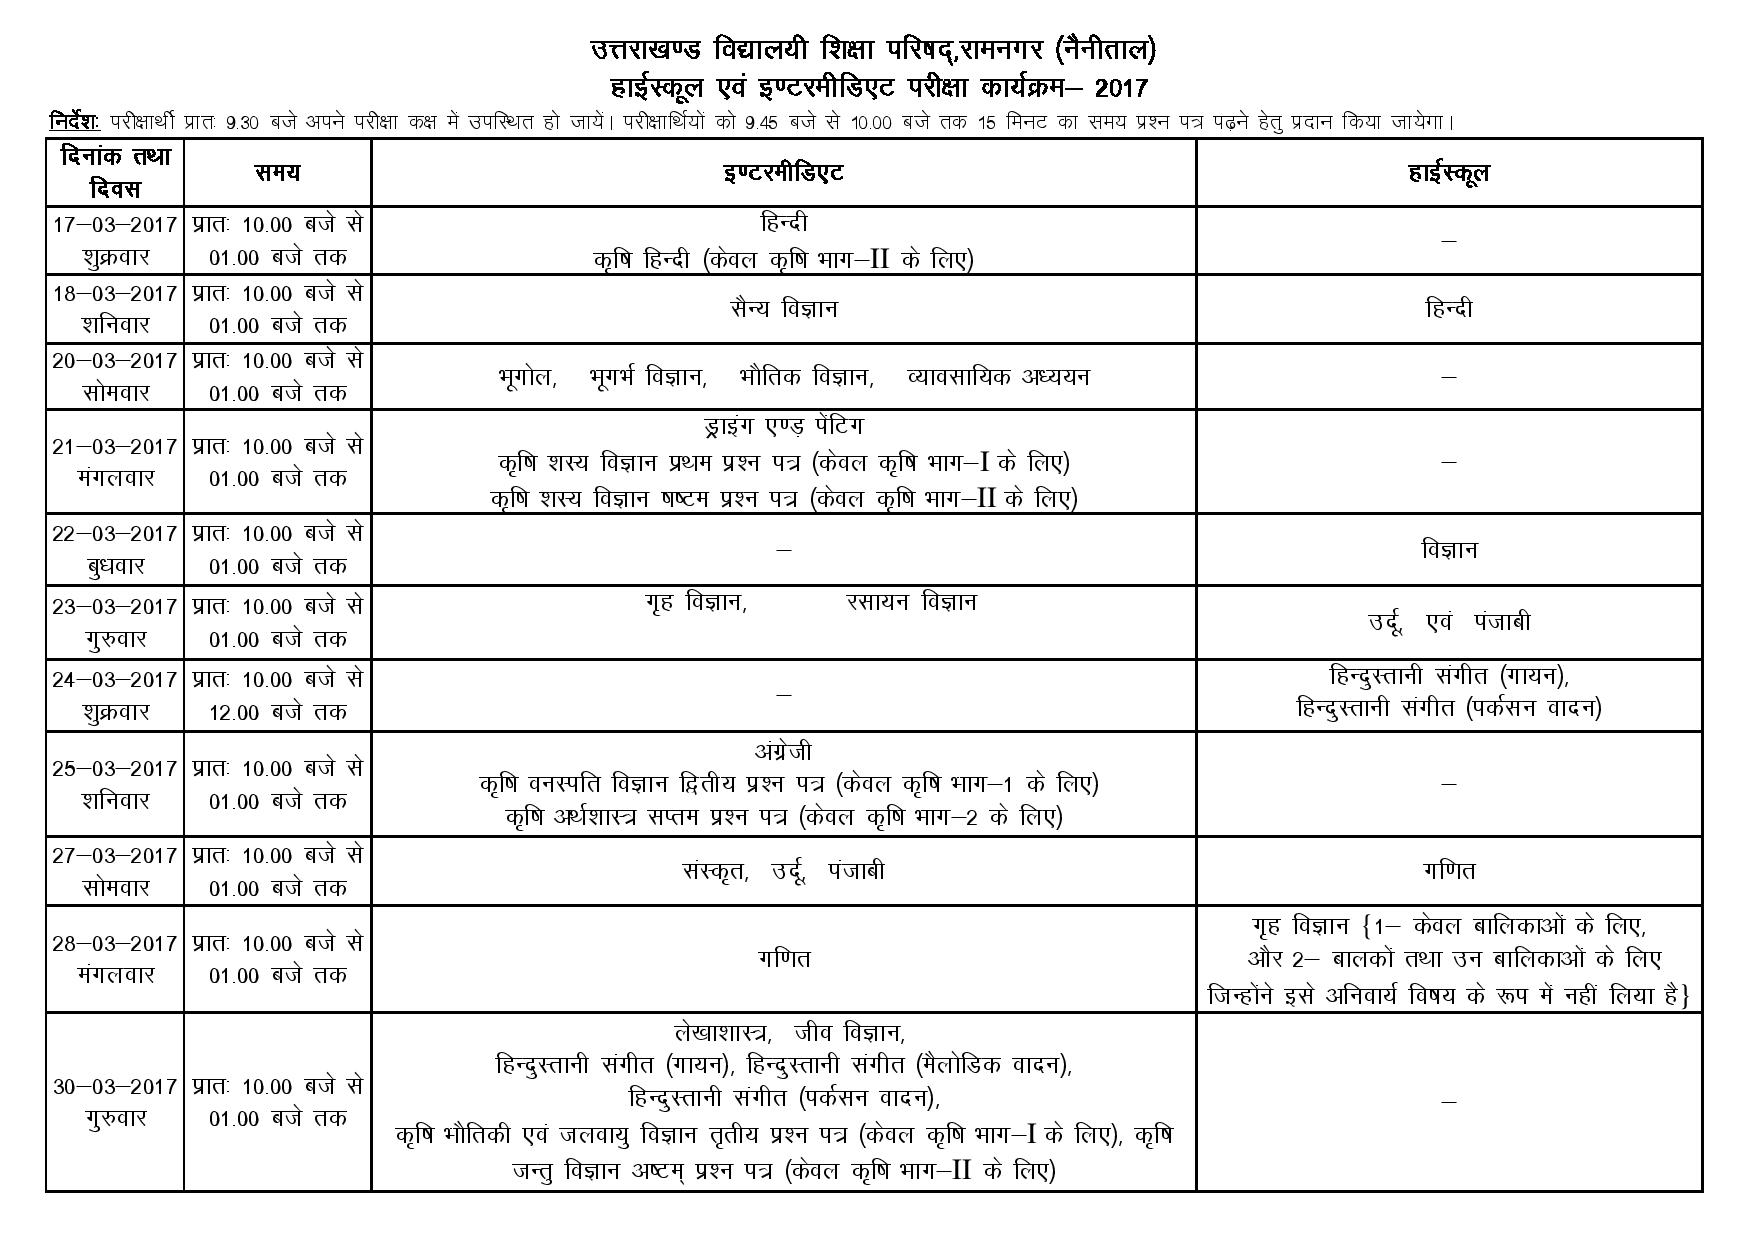 UP Board Inter 2nd year Result